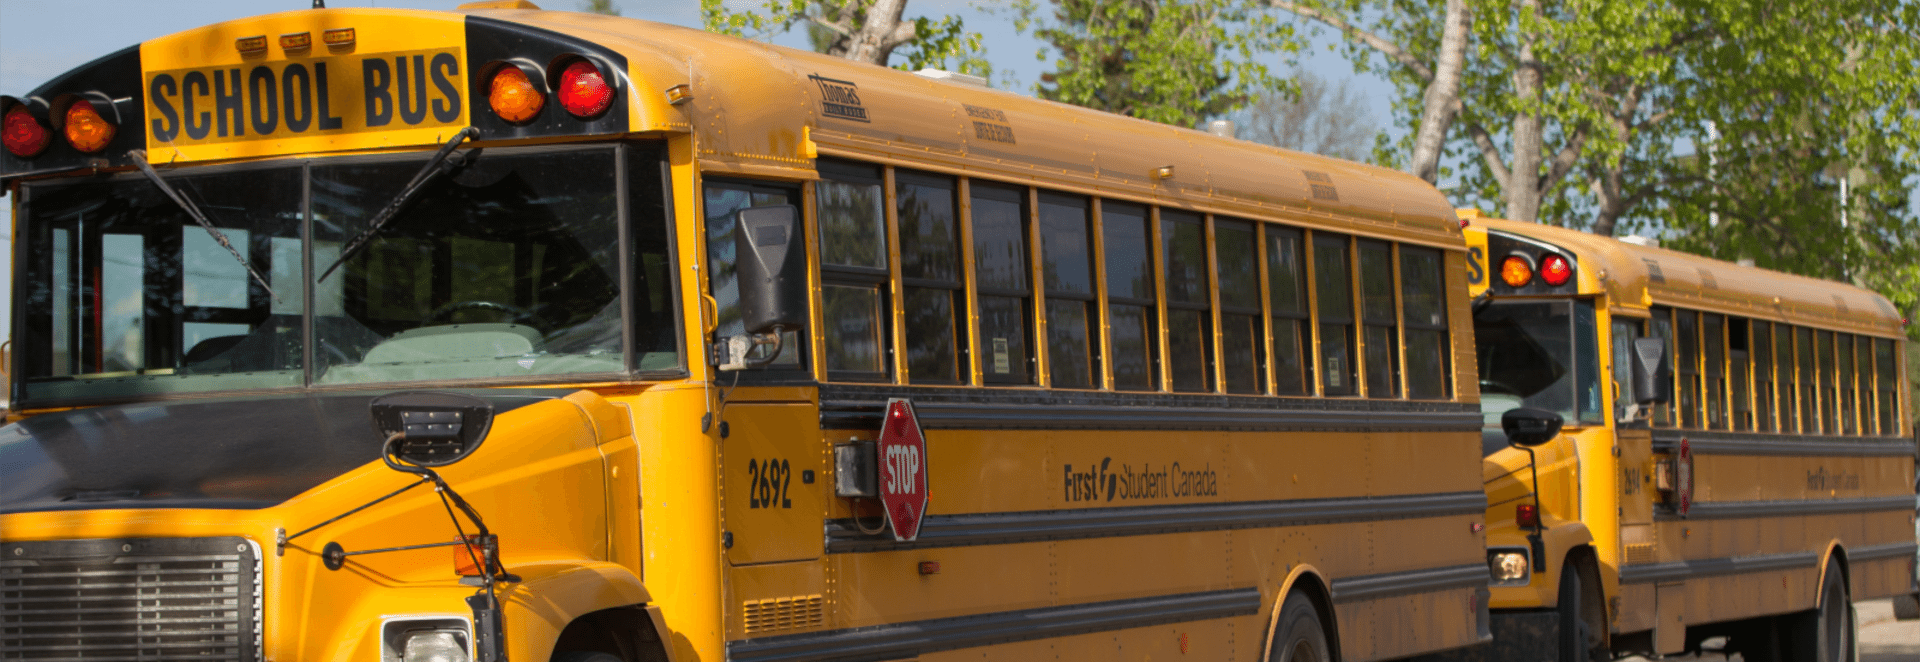 Parents urge change to city policy on school buses